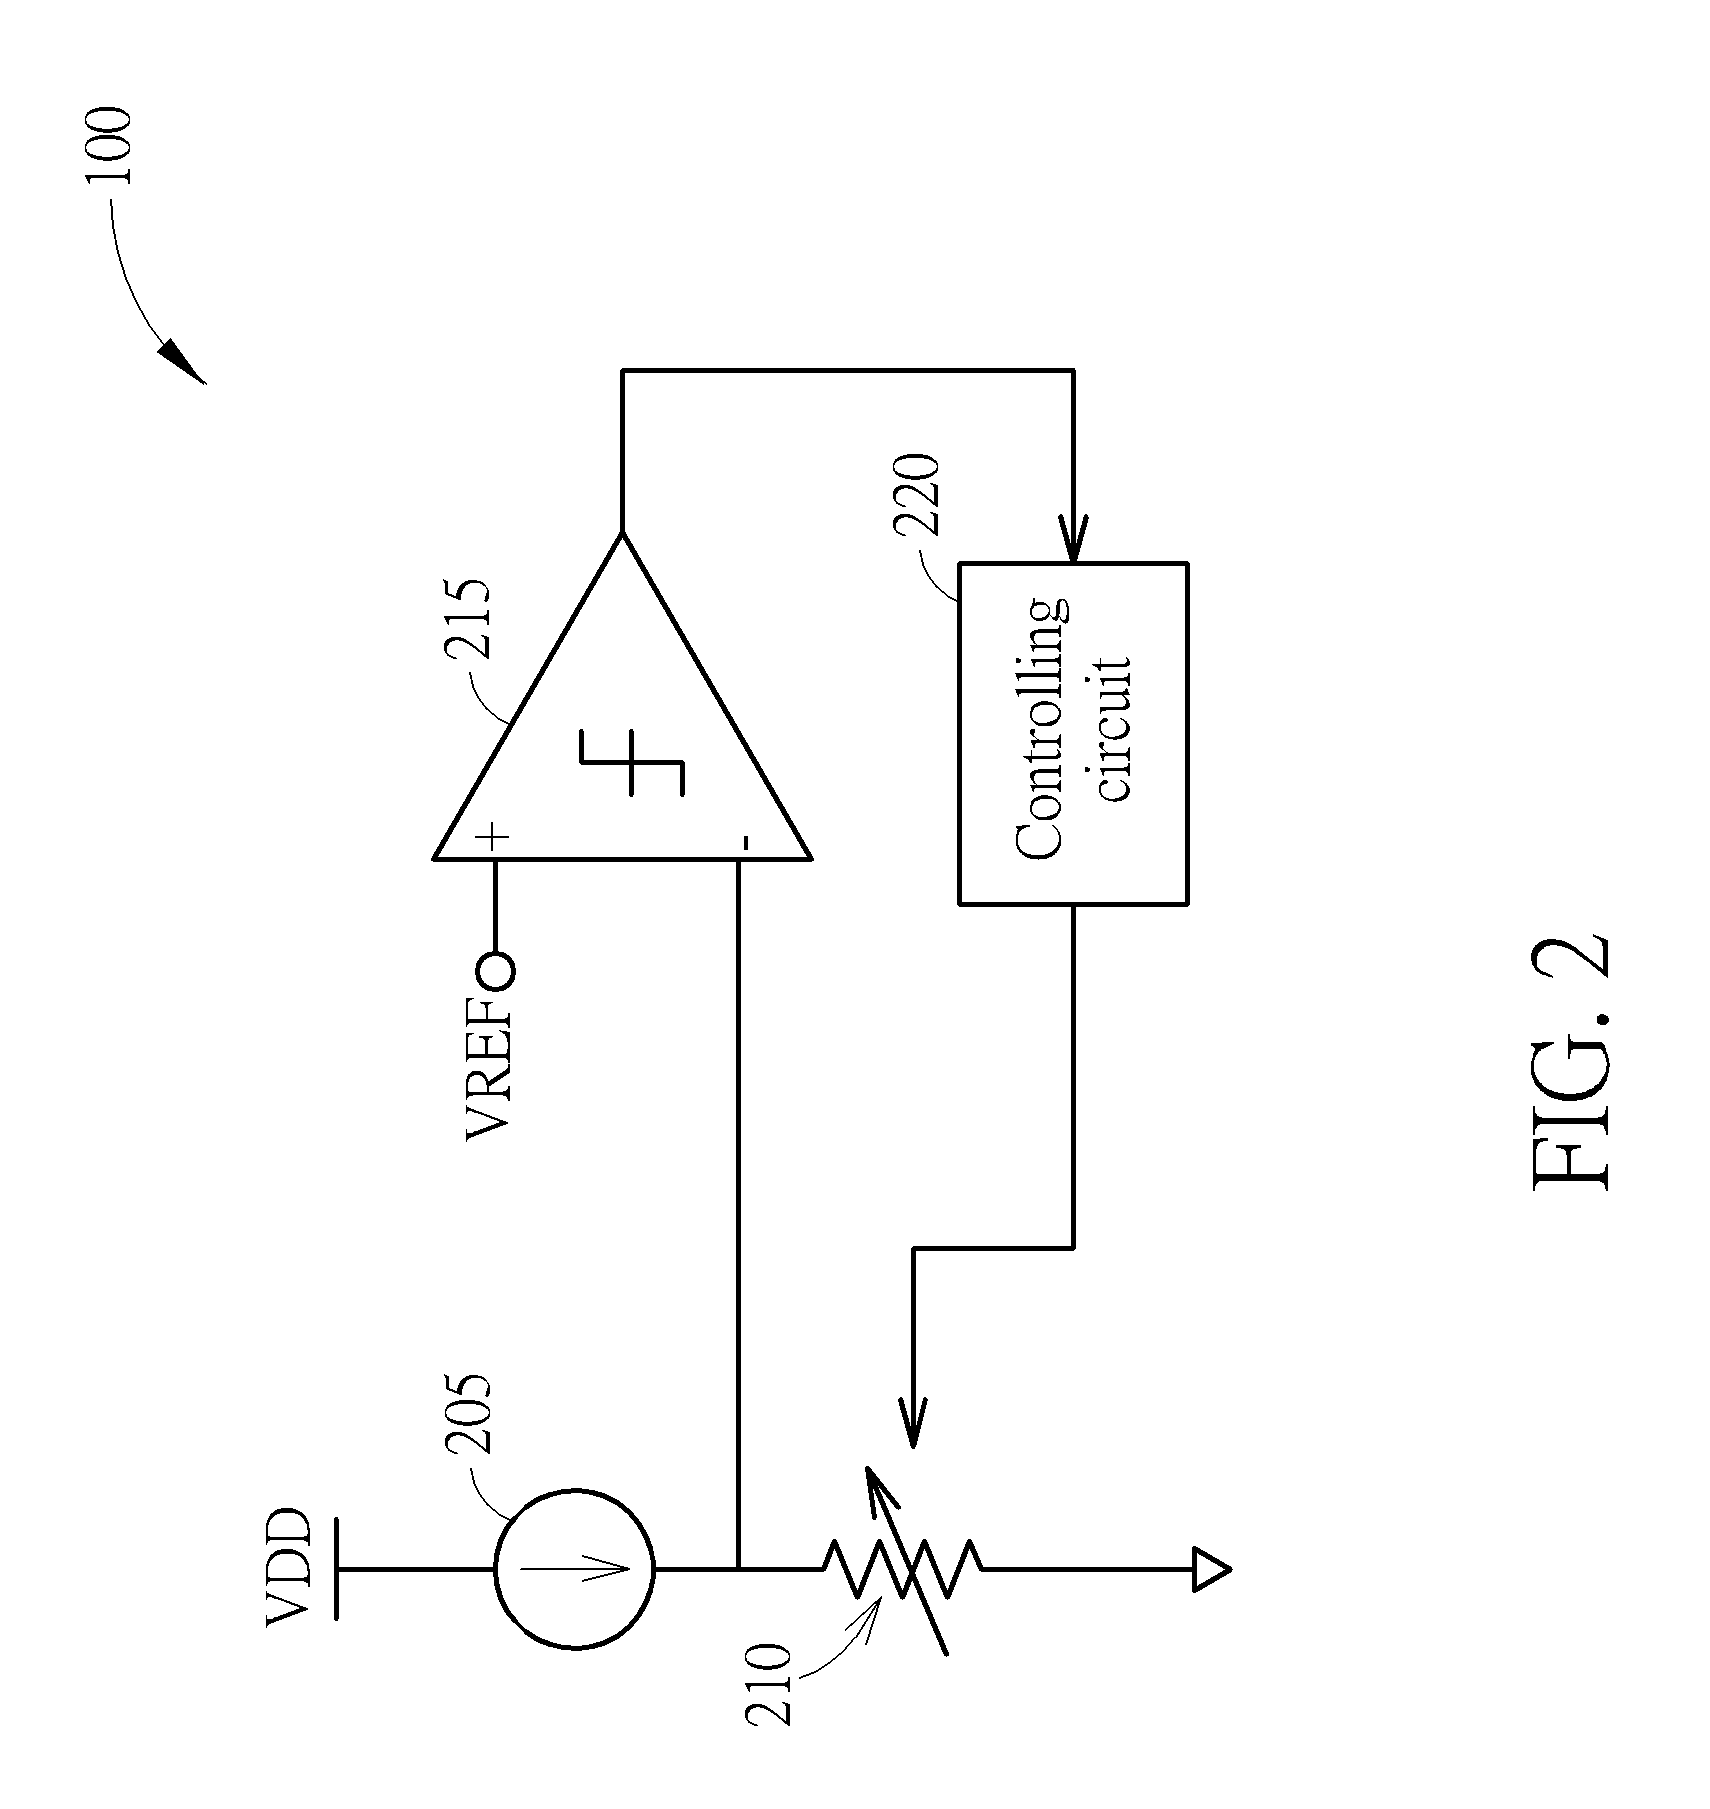 Driving circuit, driving apparatus, and method for adjusting output impedance to match transmission line impedance by using current adjustment